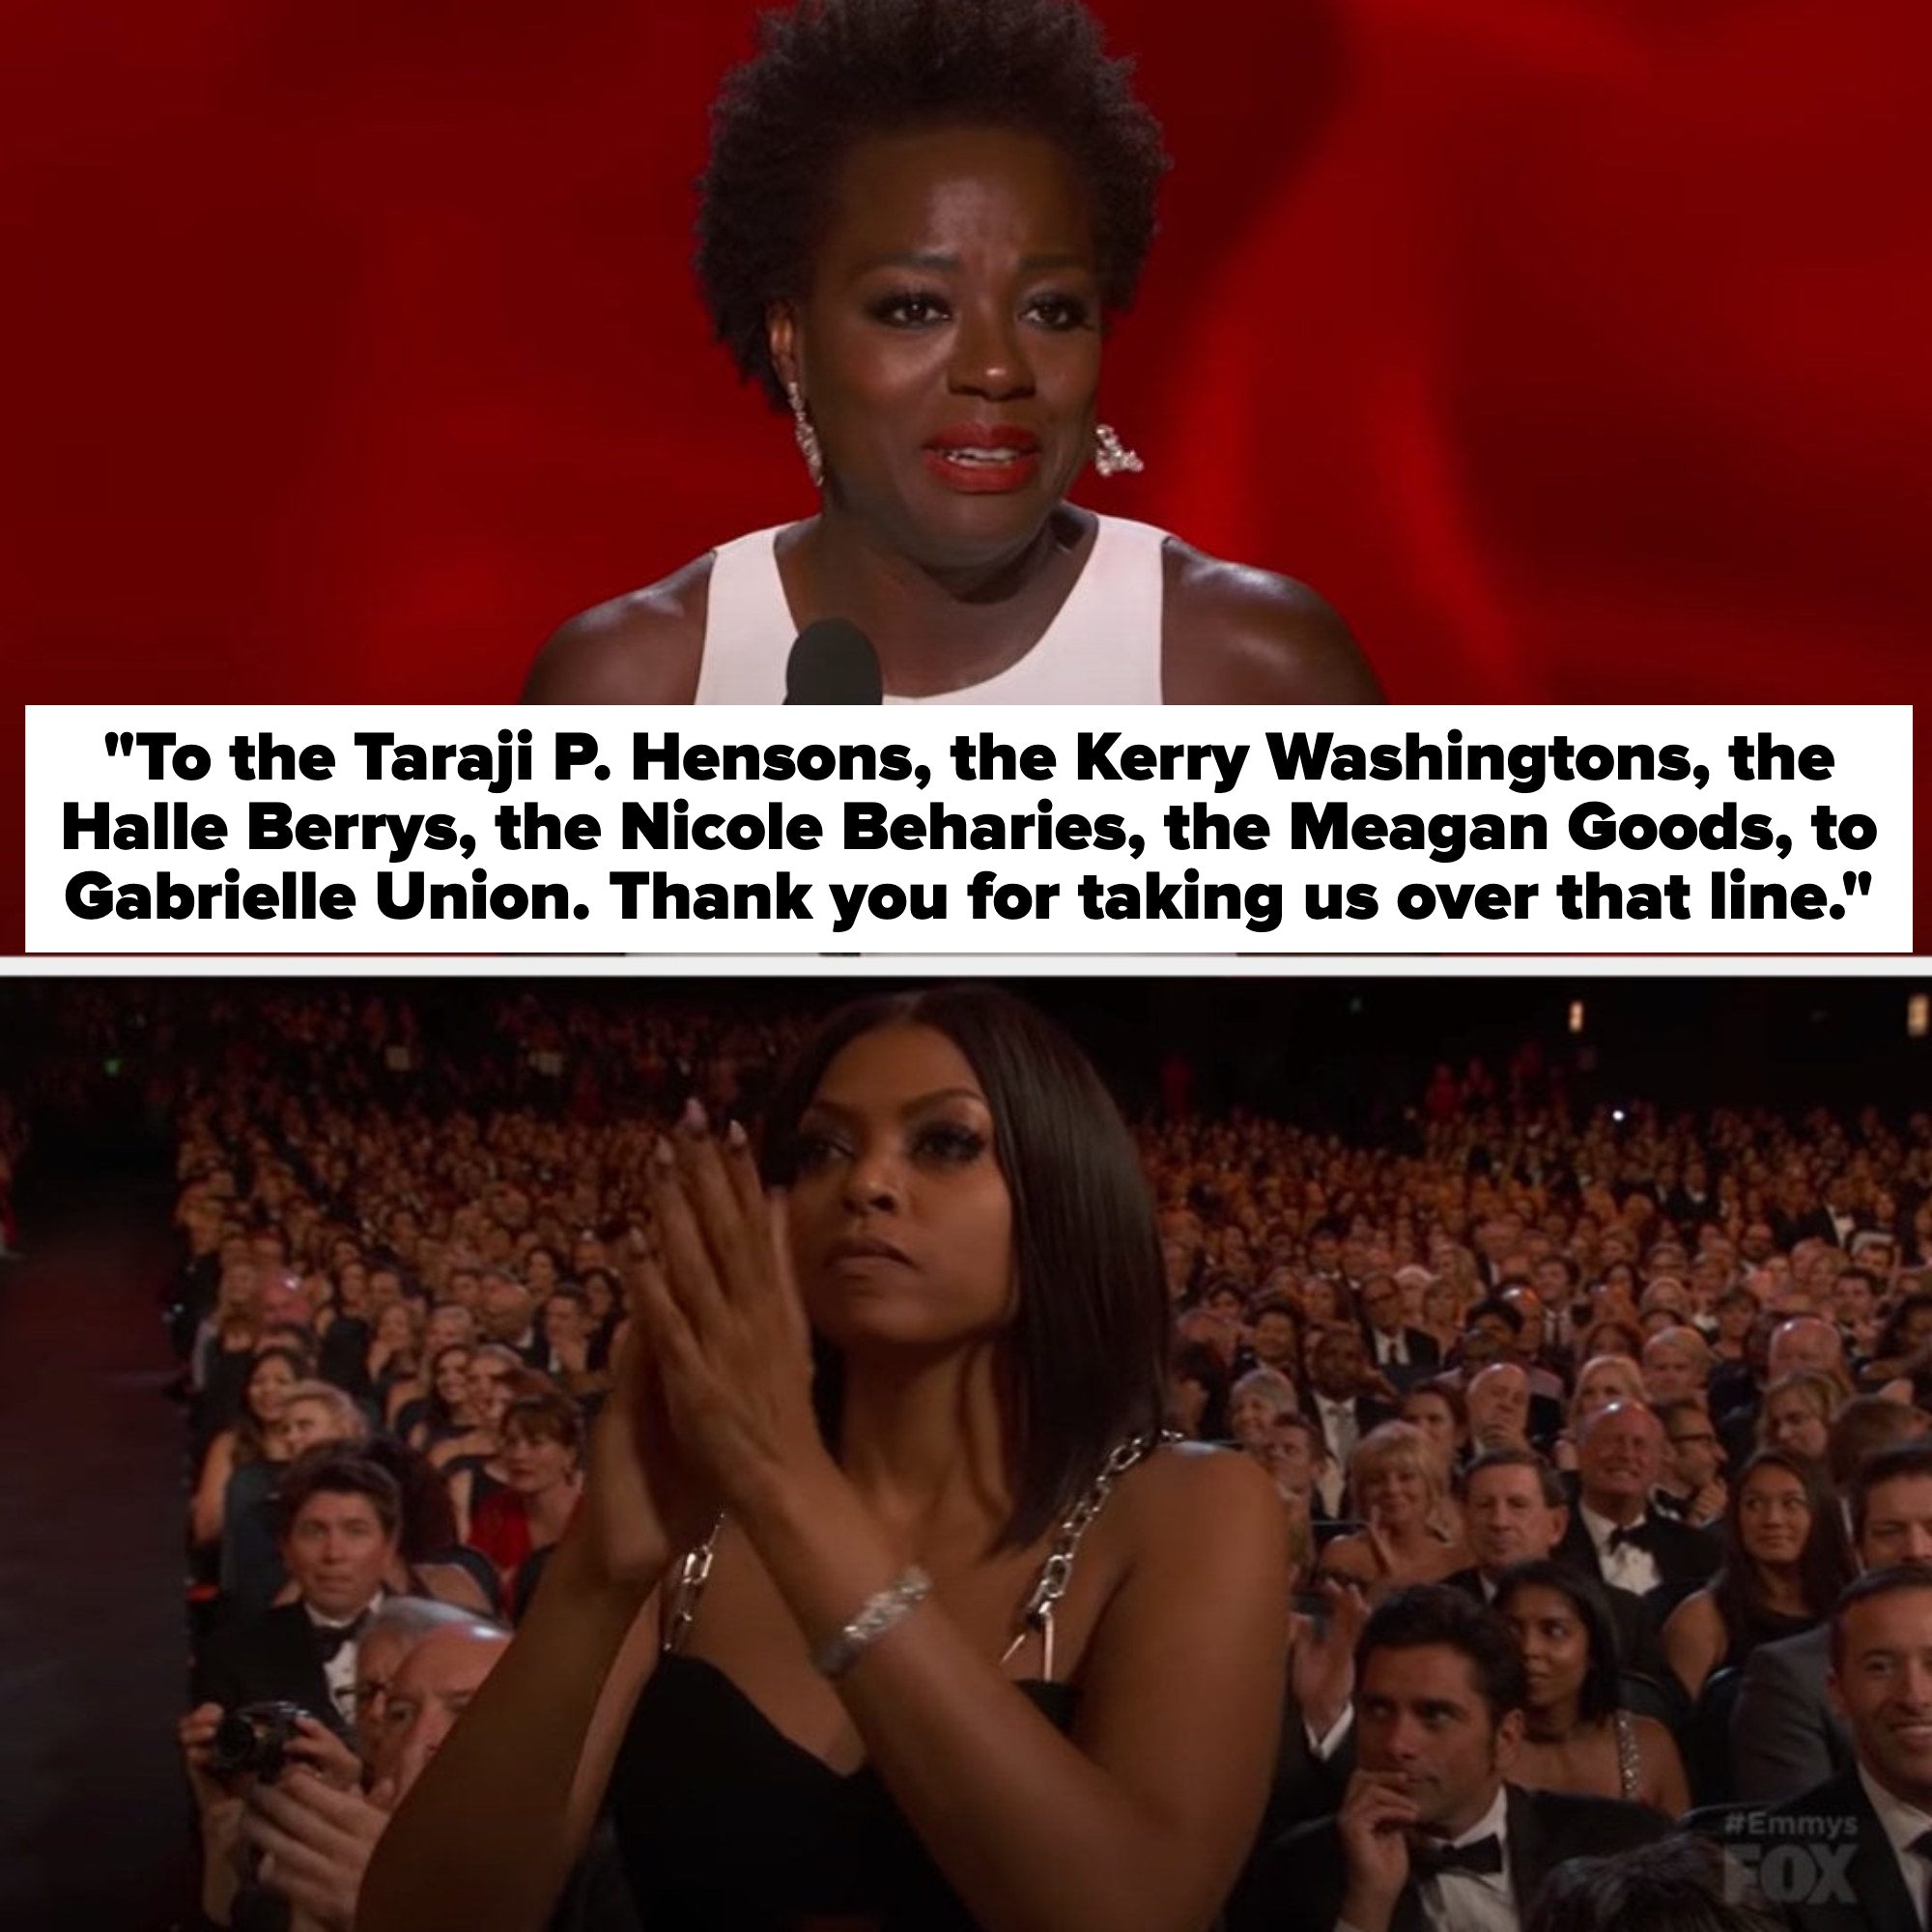 Davis thanking her fellow actors, saying: &quot;And to the Taraji P. Hensons, the Kerry Washingtons, the Halle Berrys, the Nicole Beharies, the Meagan Goods, to Gabrielle Union. Thank you for taking us over that line&quot;